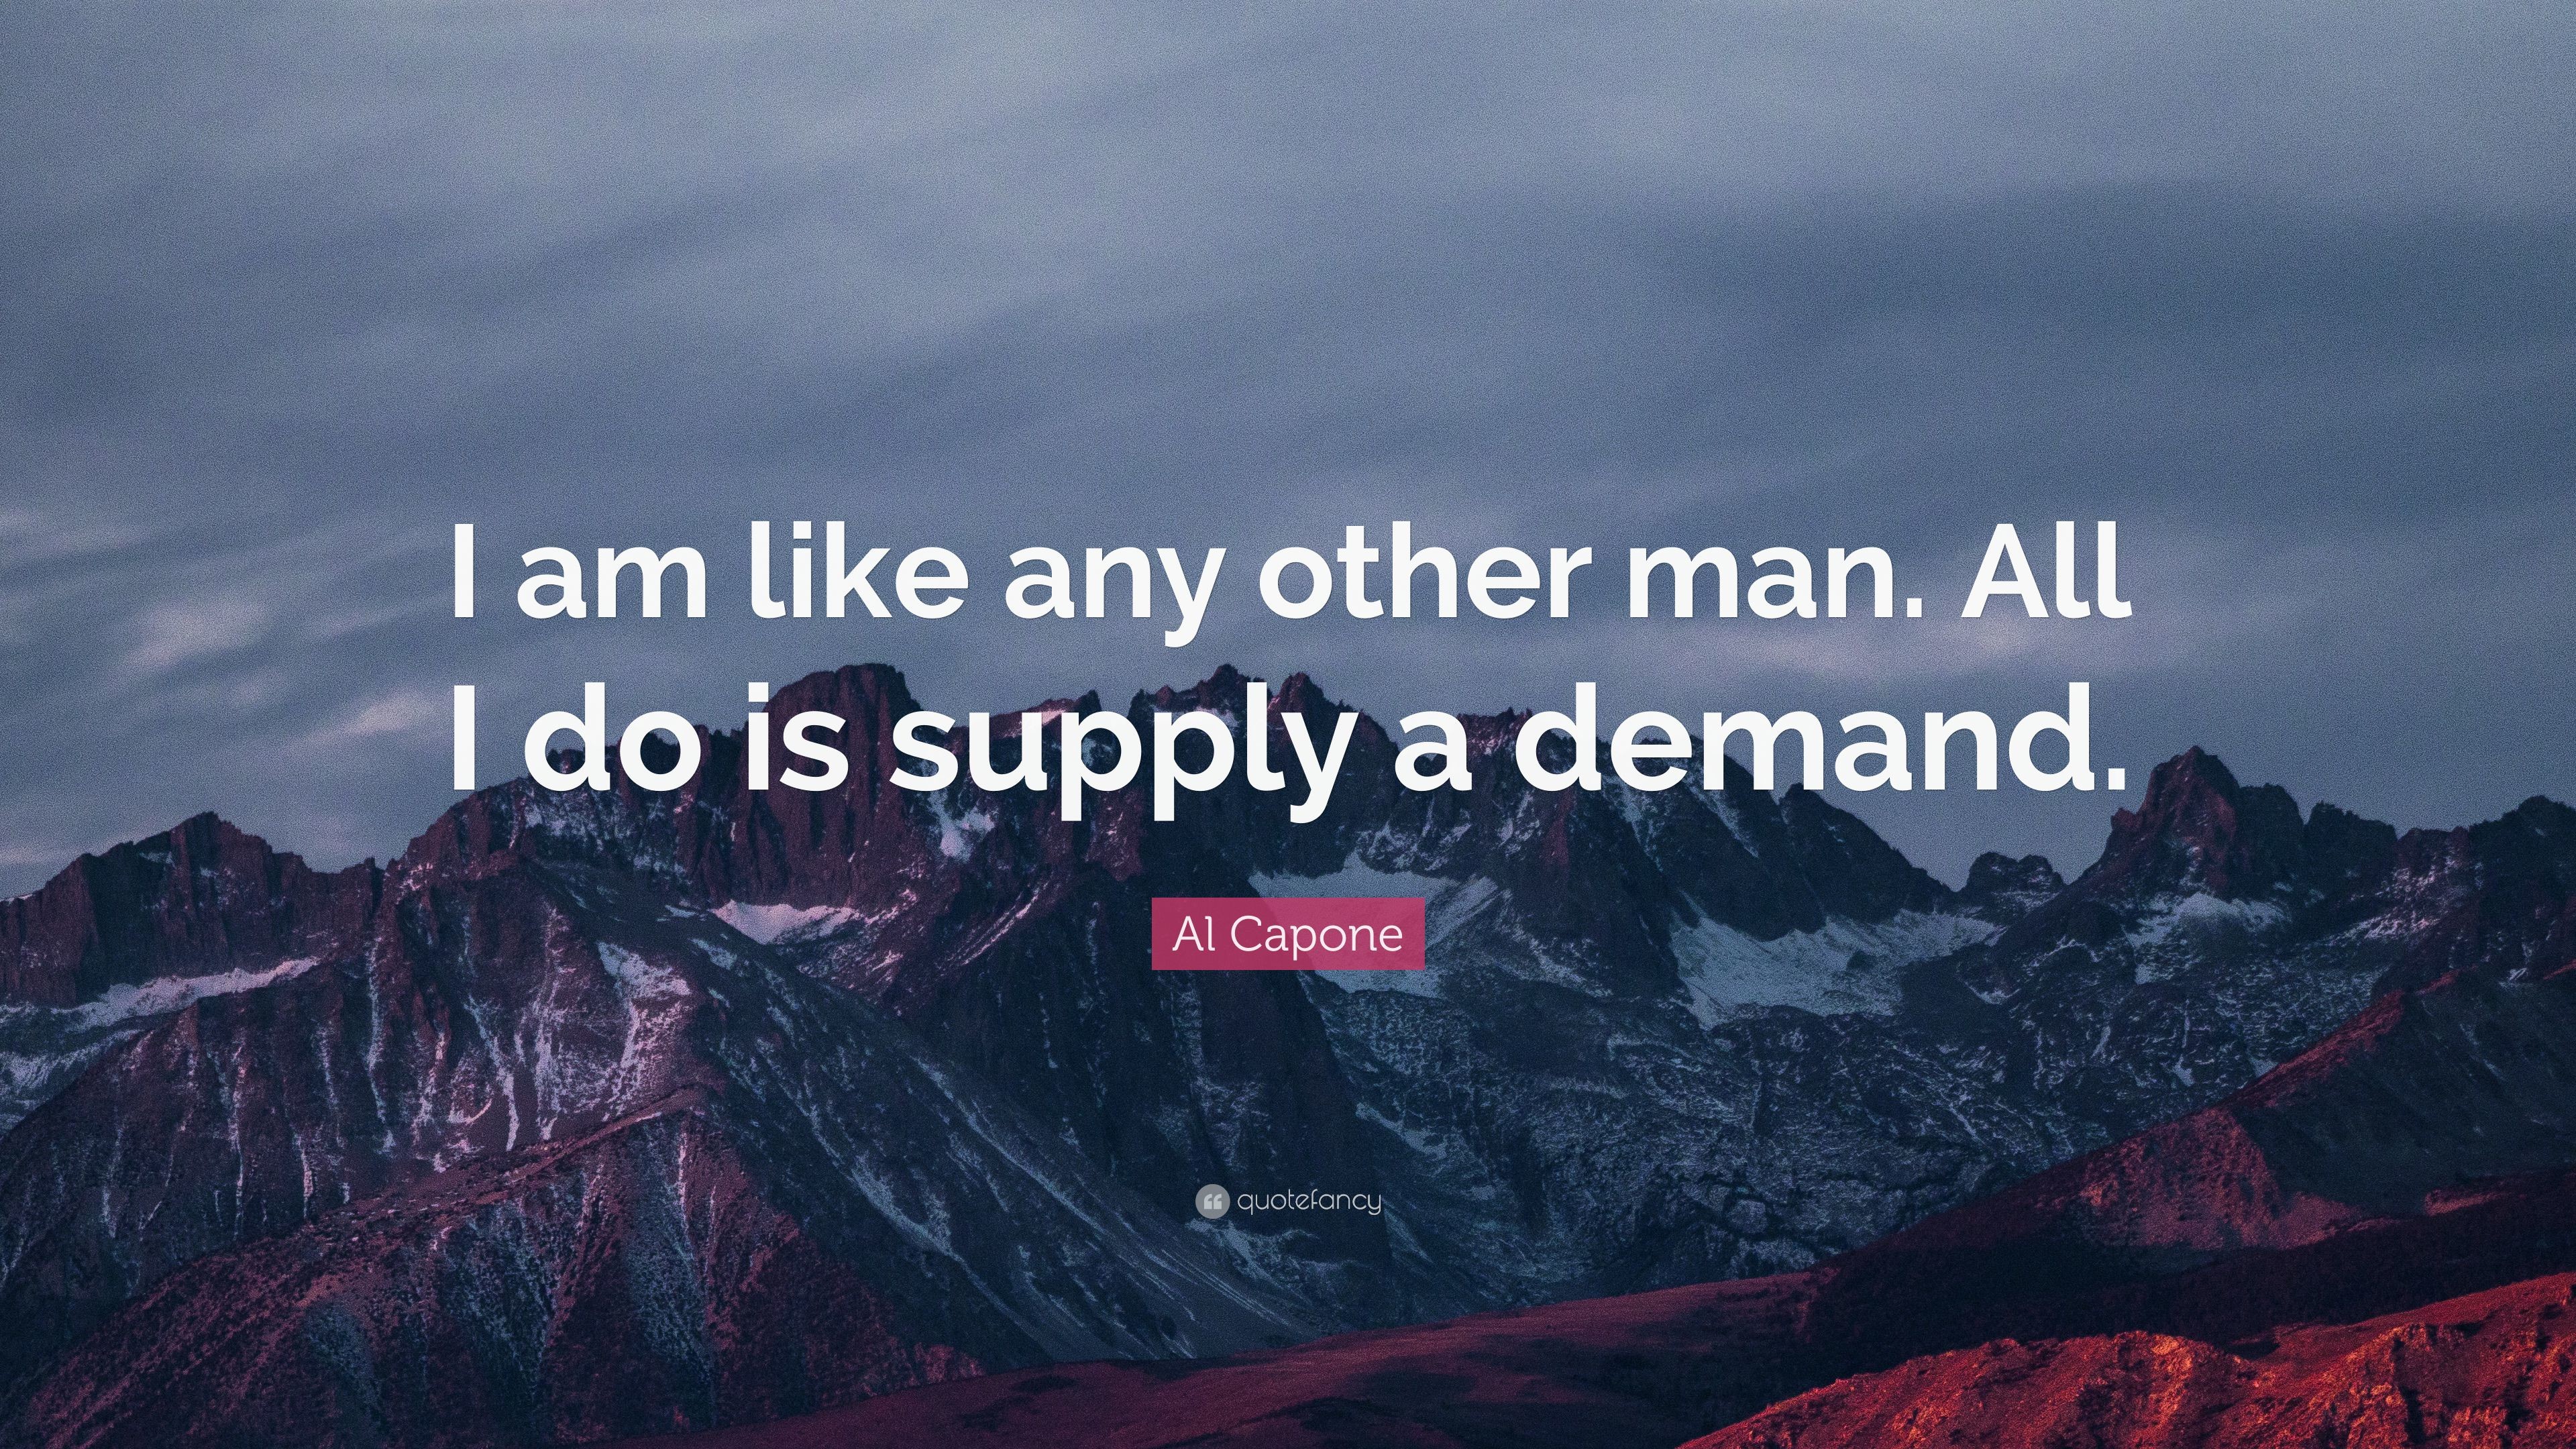 3840x2160 Al Capone Quote: “I am like any other man. All I do is